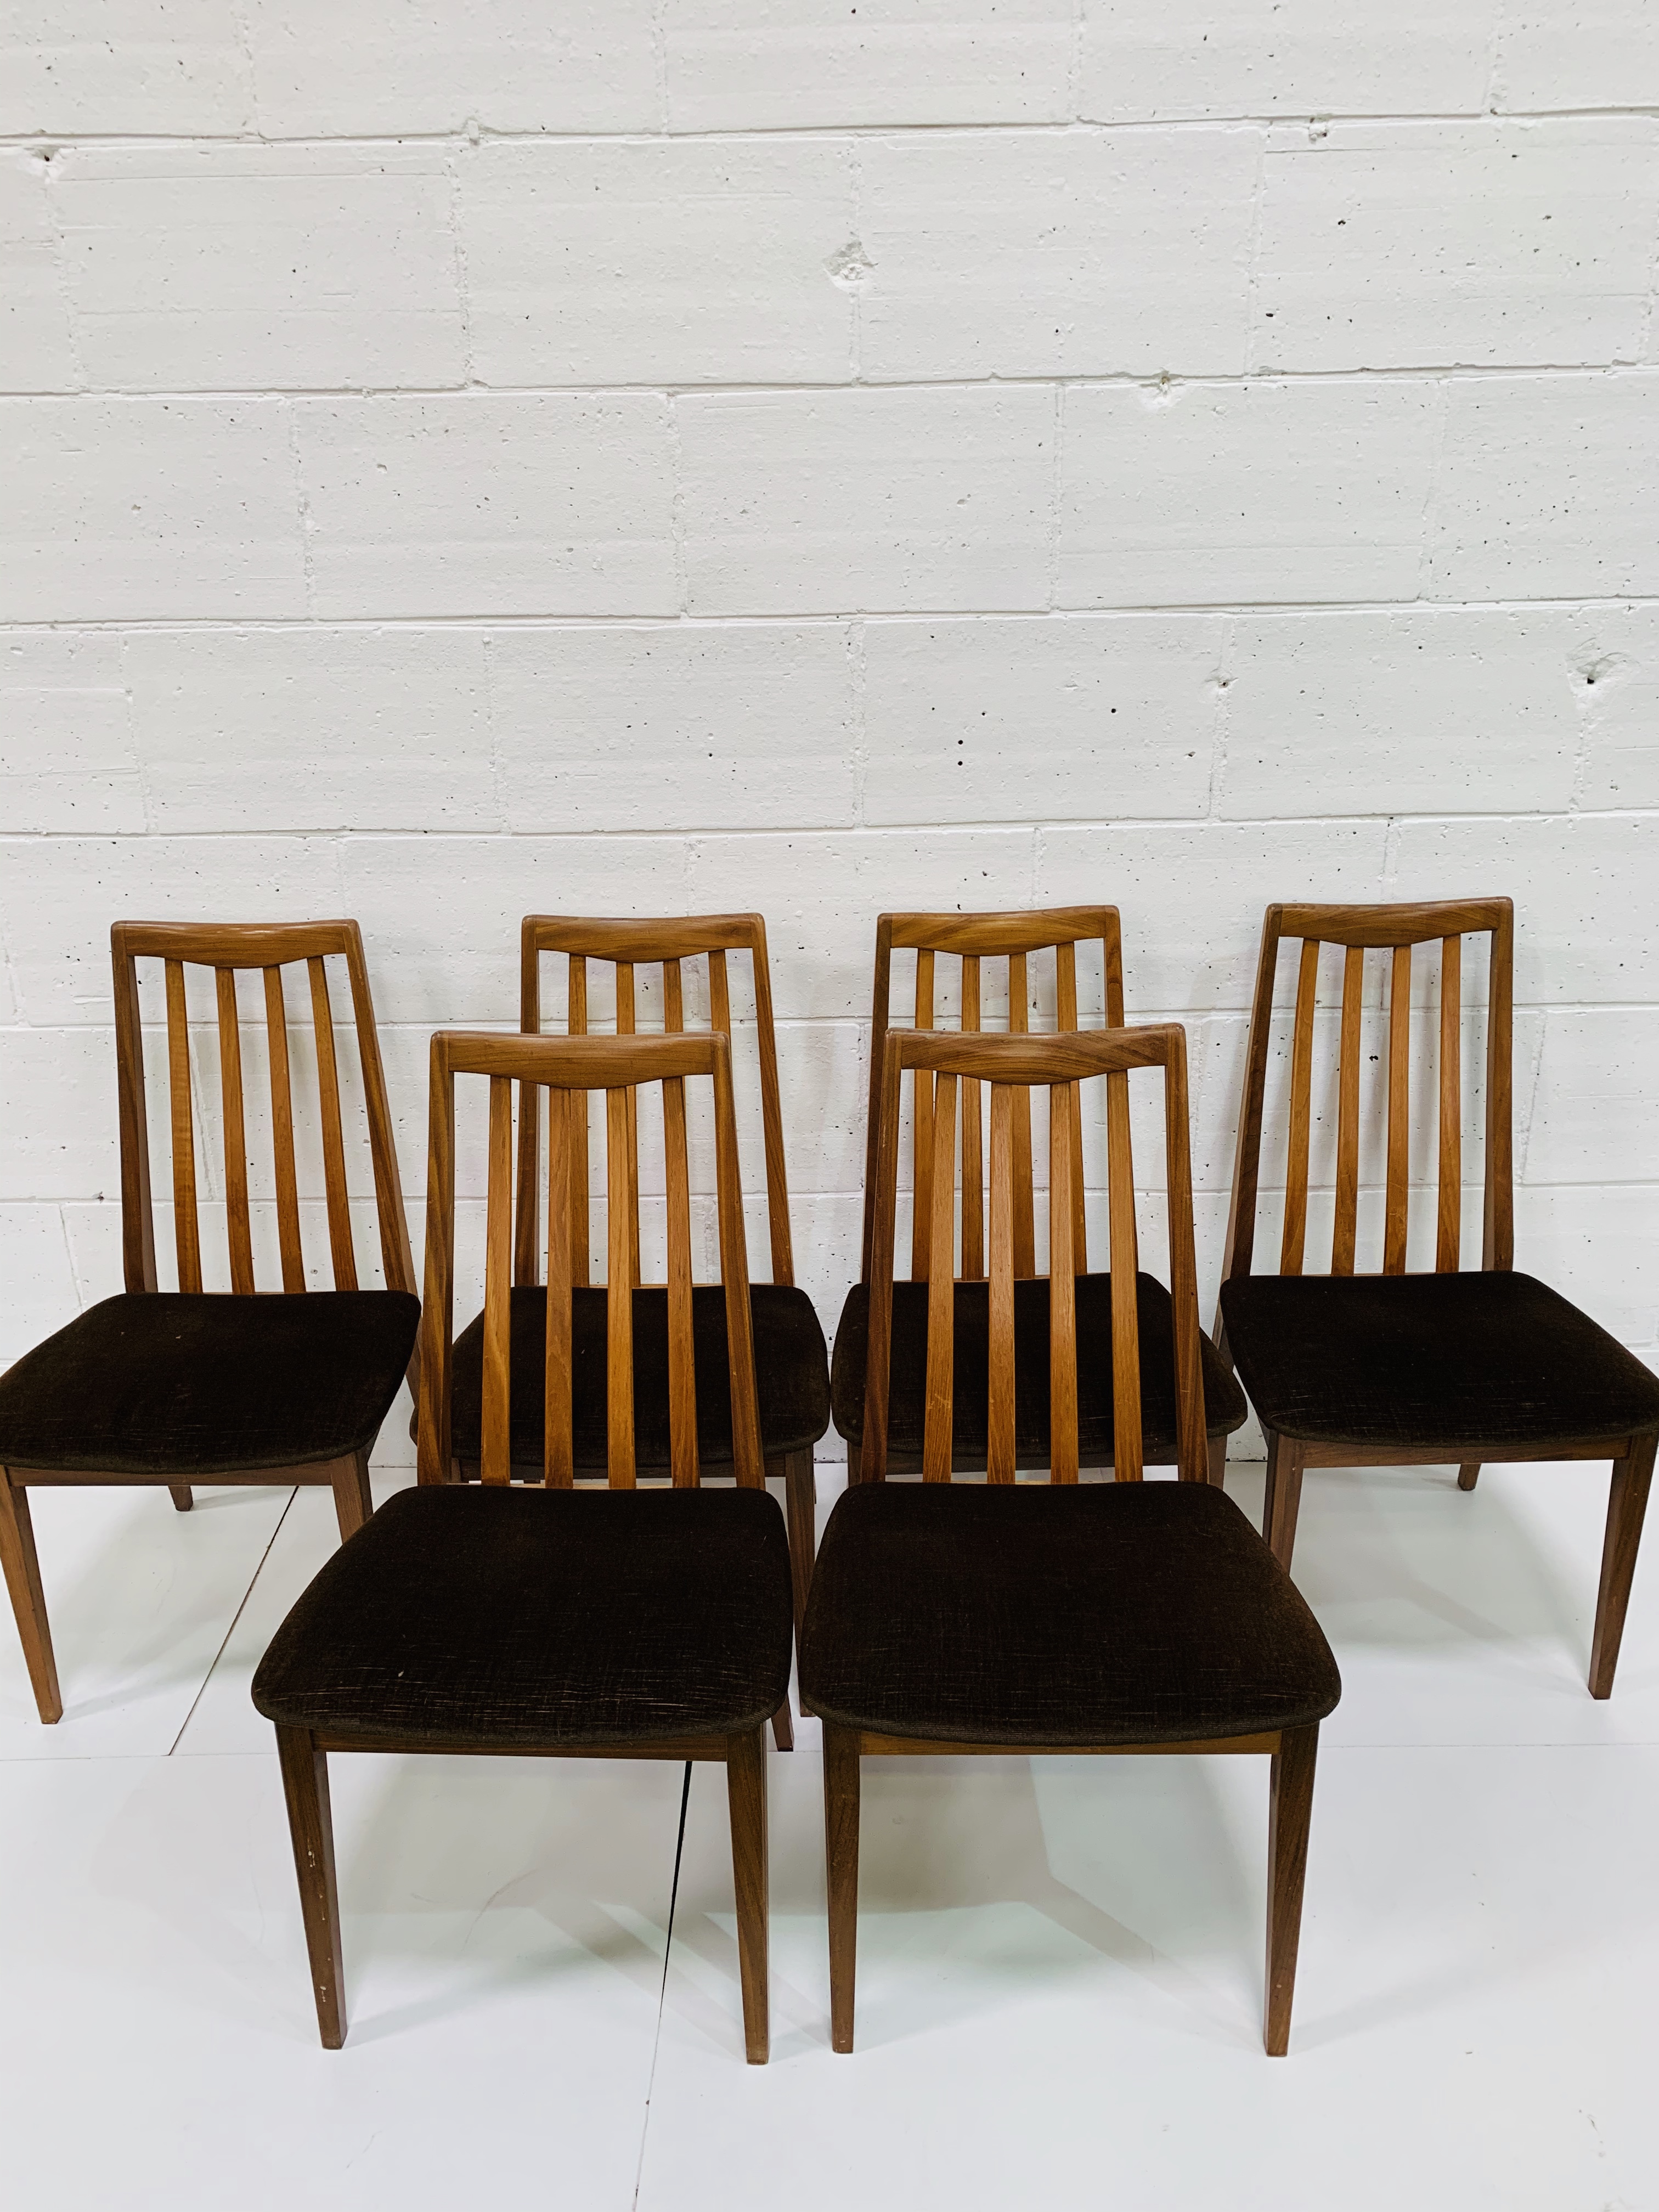 Set of 6 no. 1950's G Plan chairs with rail backs - Image 3 of 4